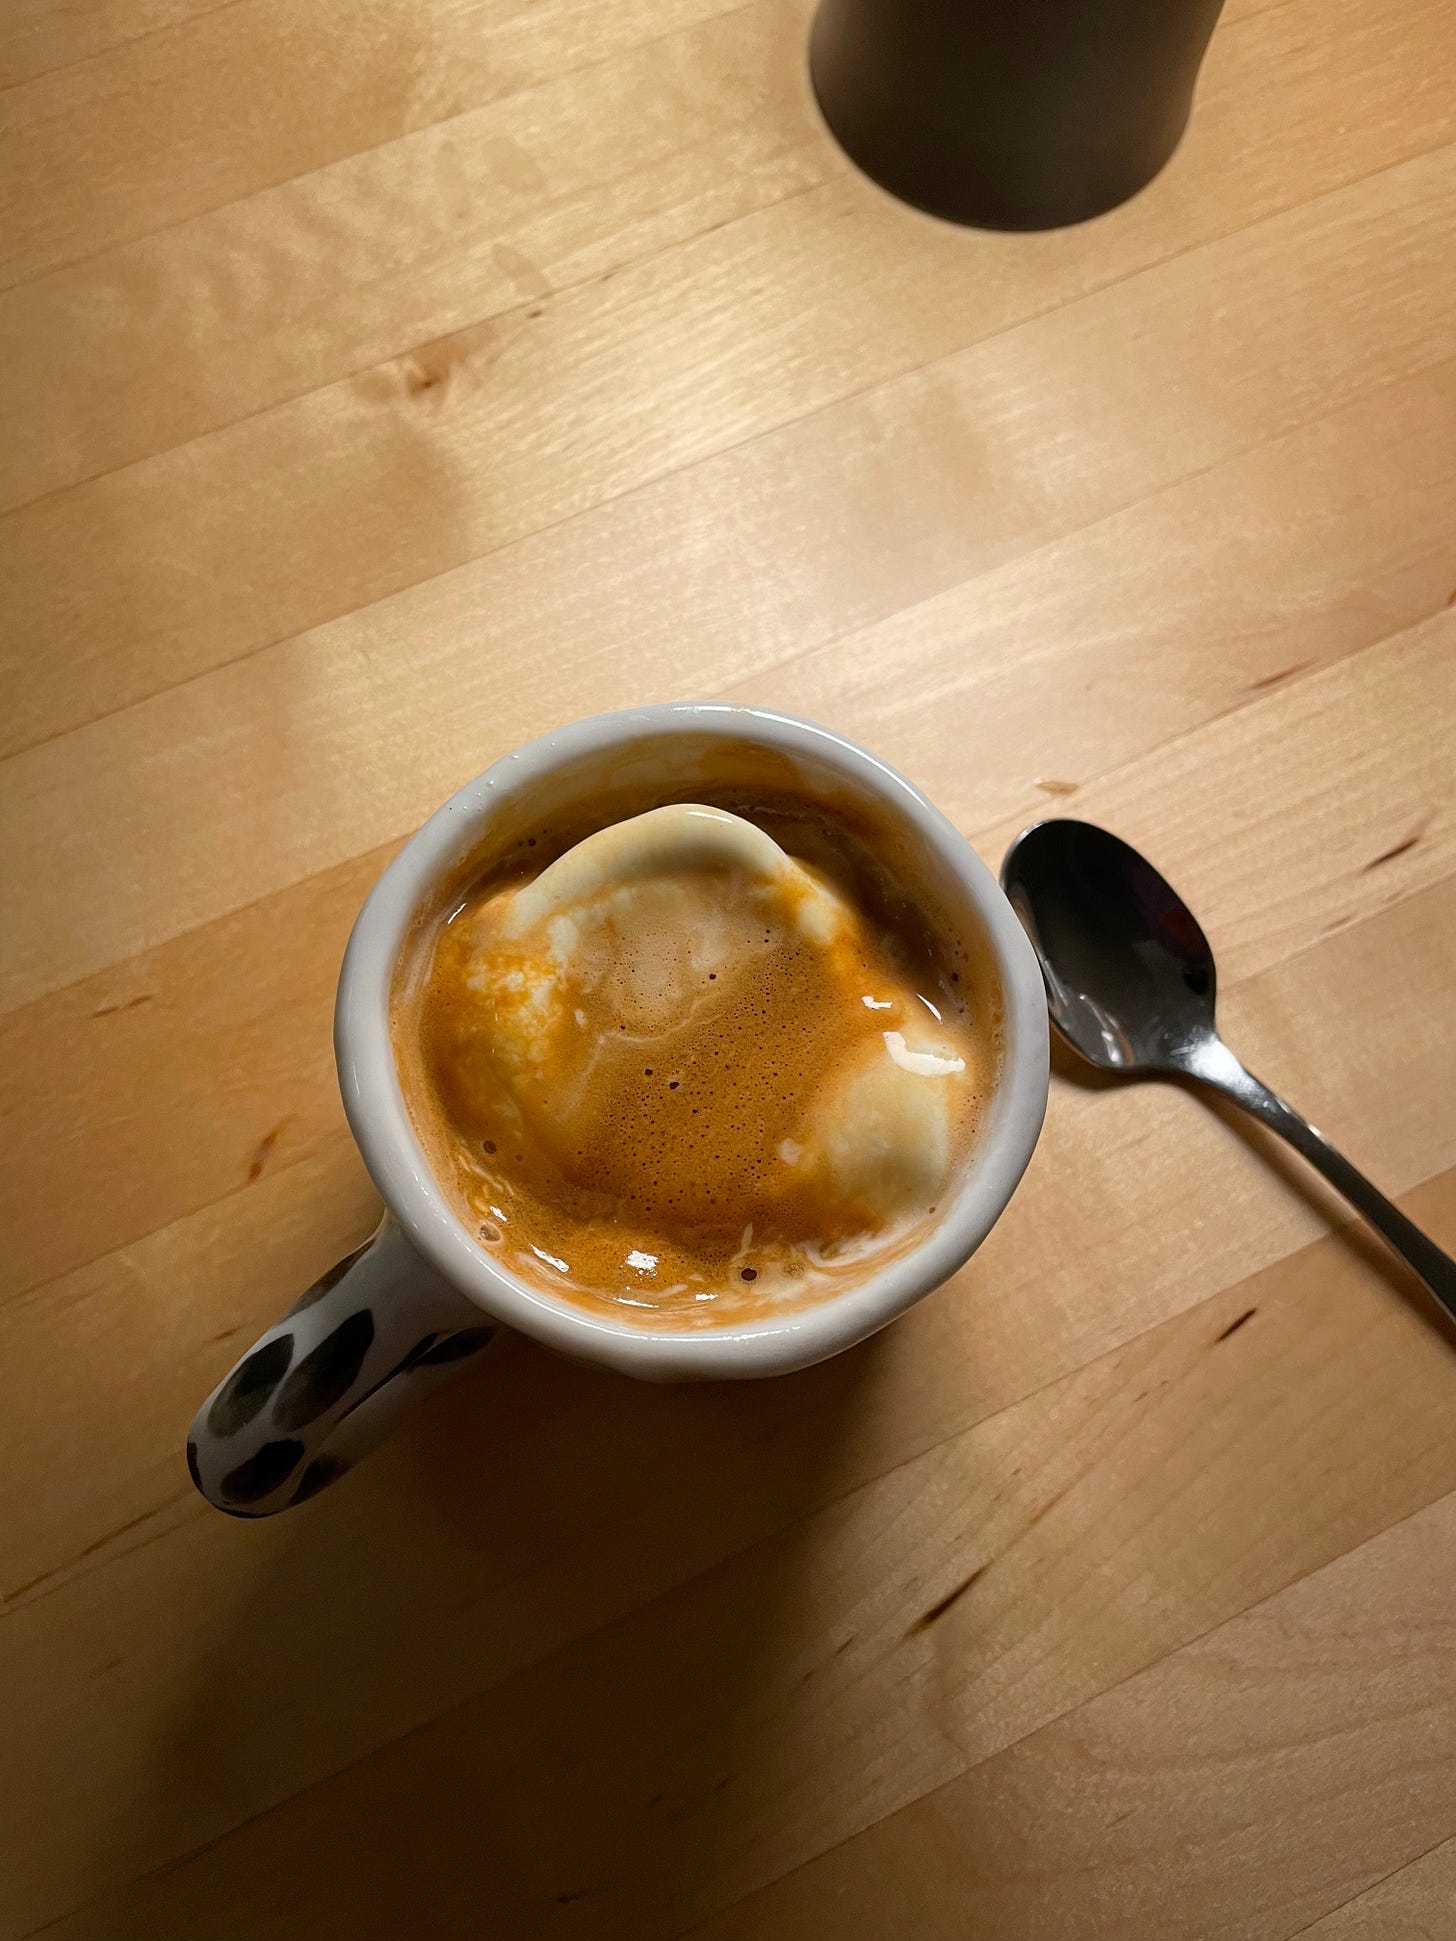 Affogato in a small ceramic cup, with a teaspoon nearby.